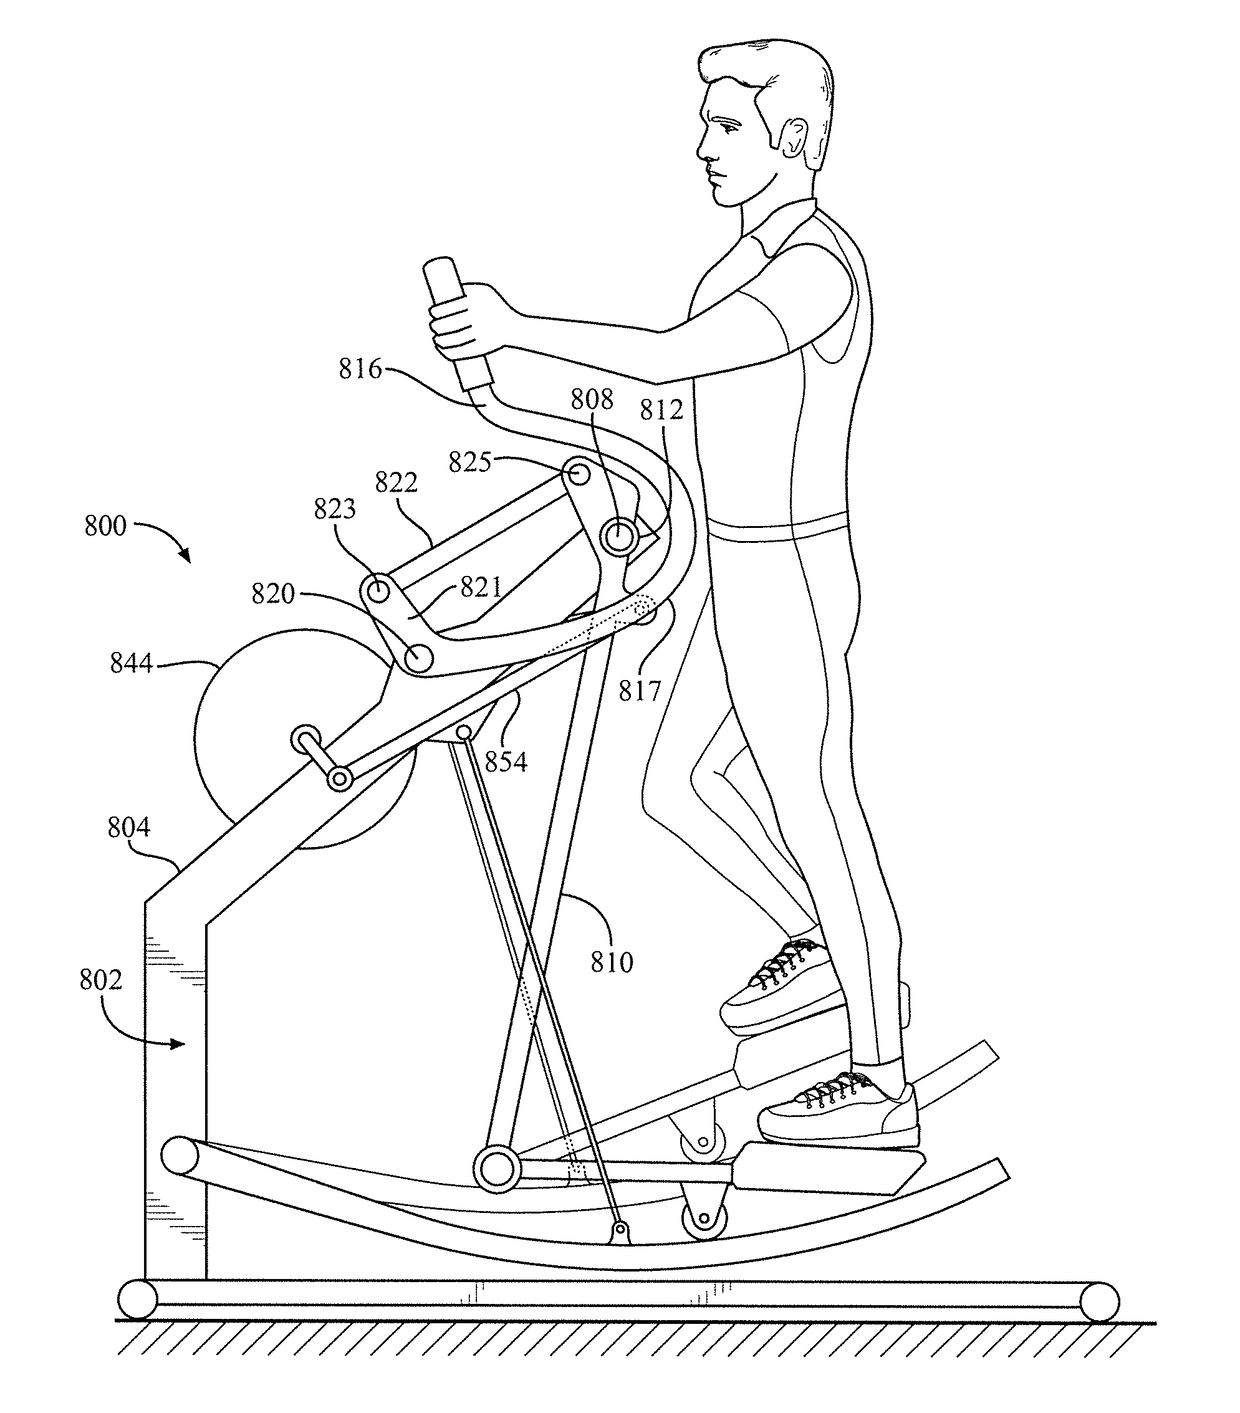 Elliptical exercise device with moving control tracks